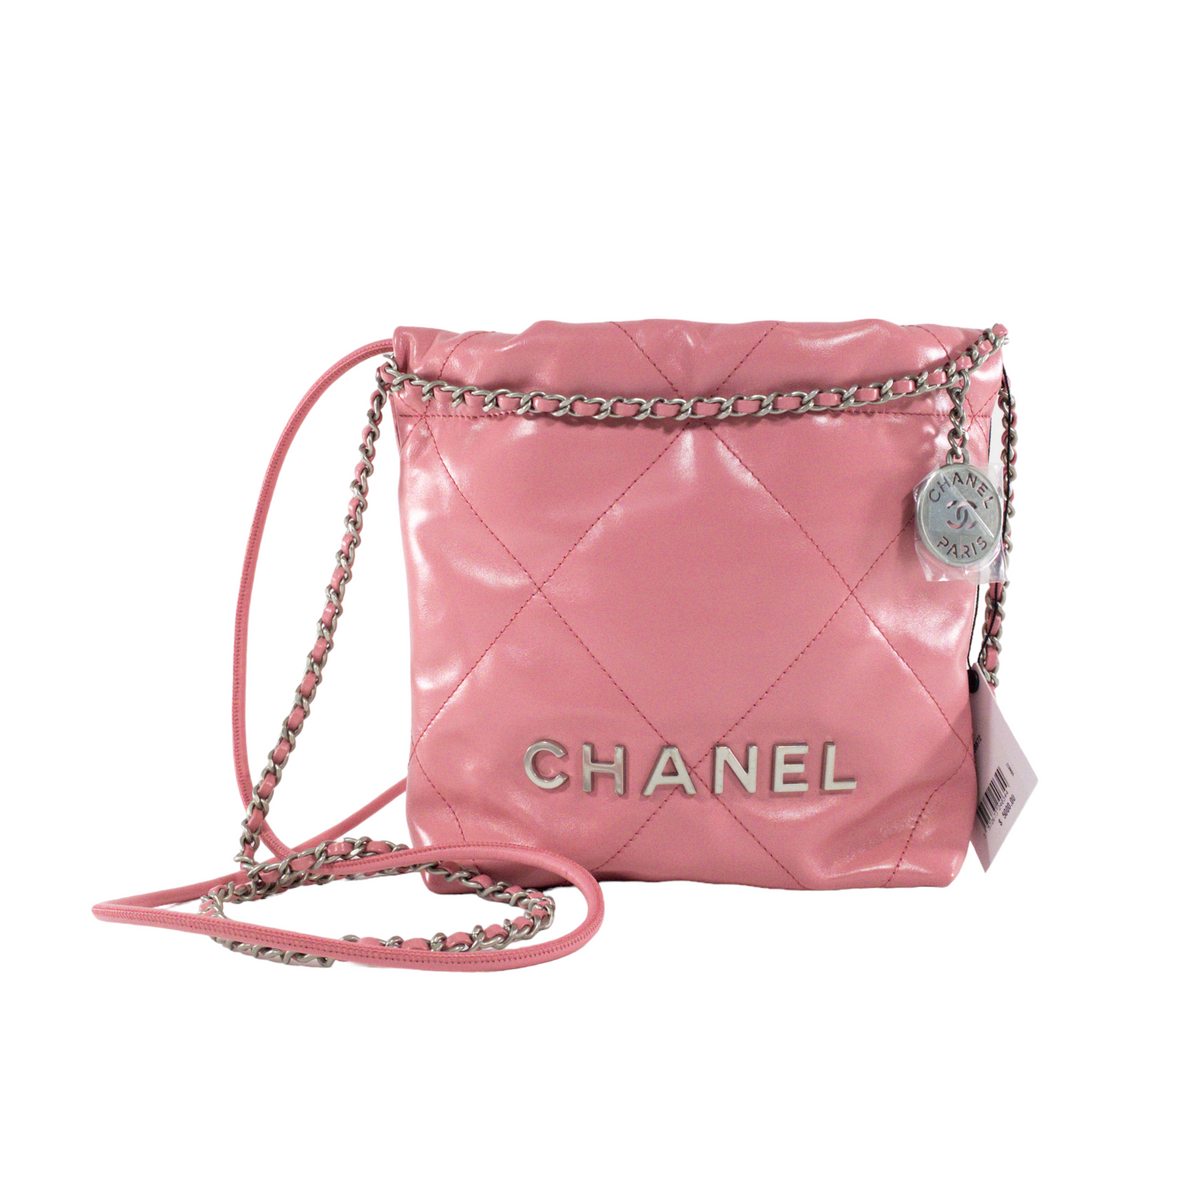 Chanel - Authenticated Chanel 22 Handbag - Leather Pink Plain for Women, Never Worn